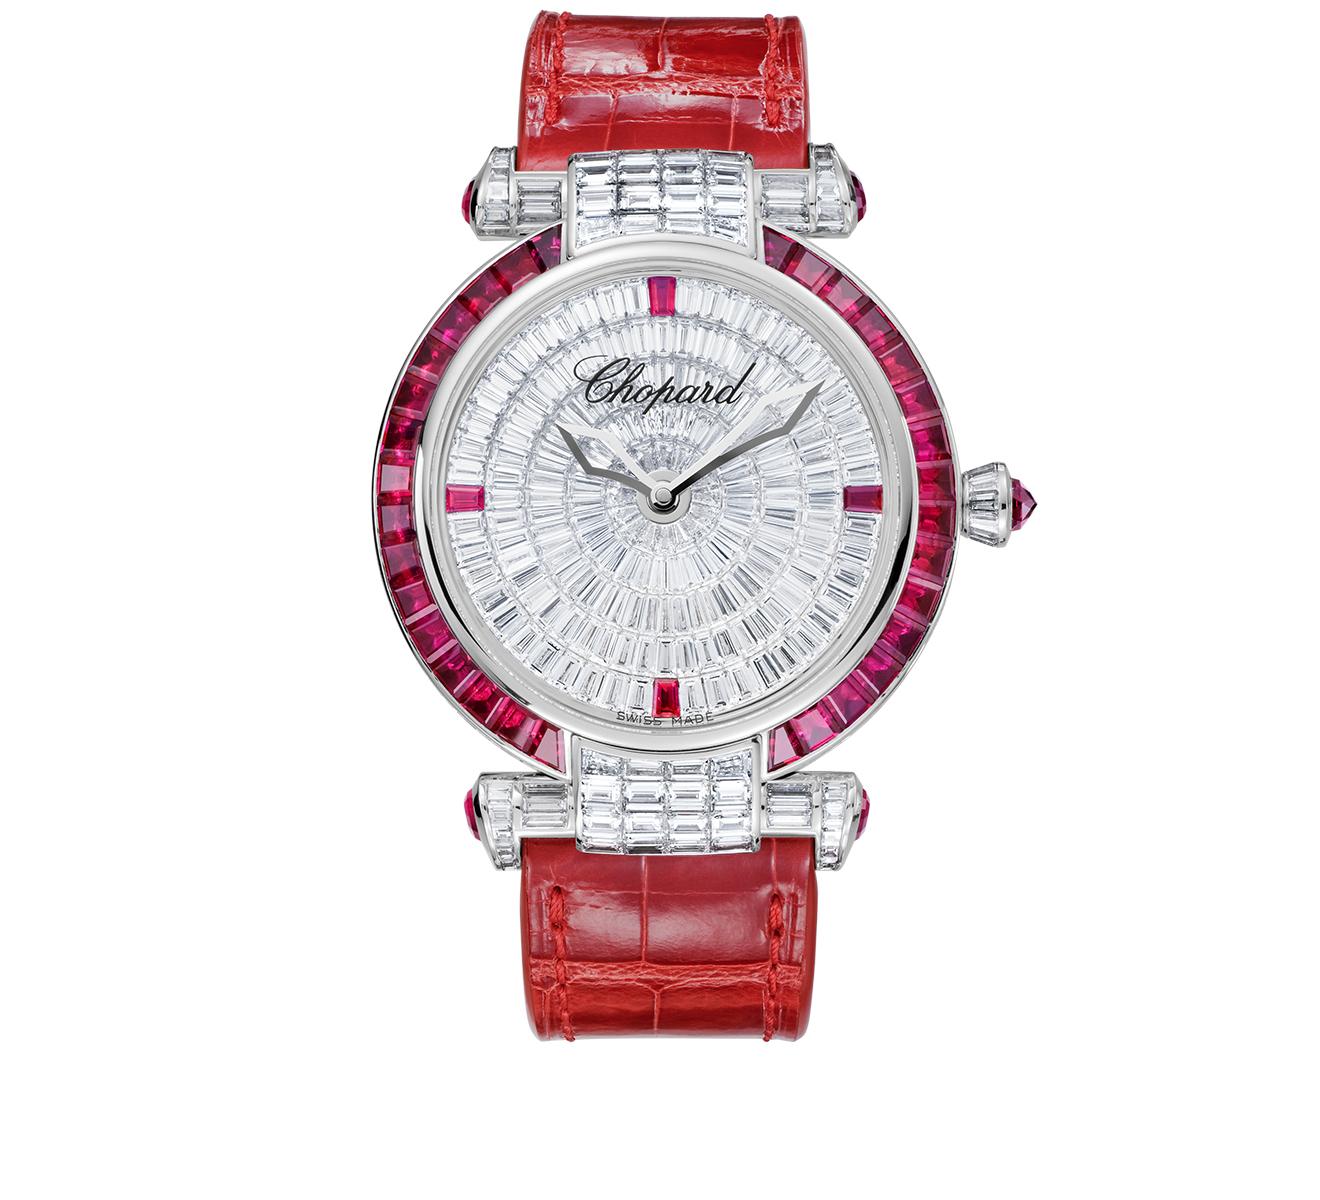 Imperiale Round in White Gold with Diamond Bezel Lugs on Red Crocodile Leather Strap with Pave Diamond Dial